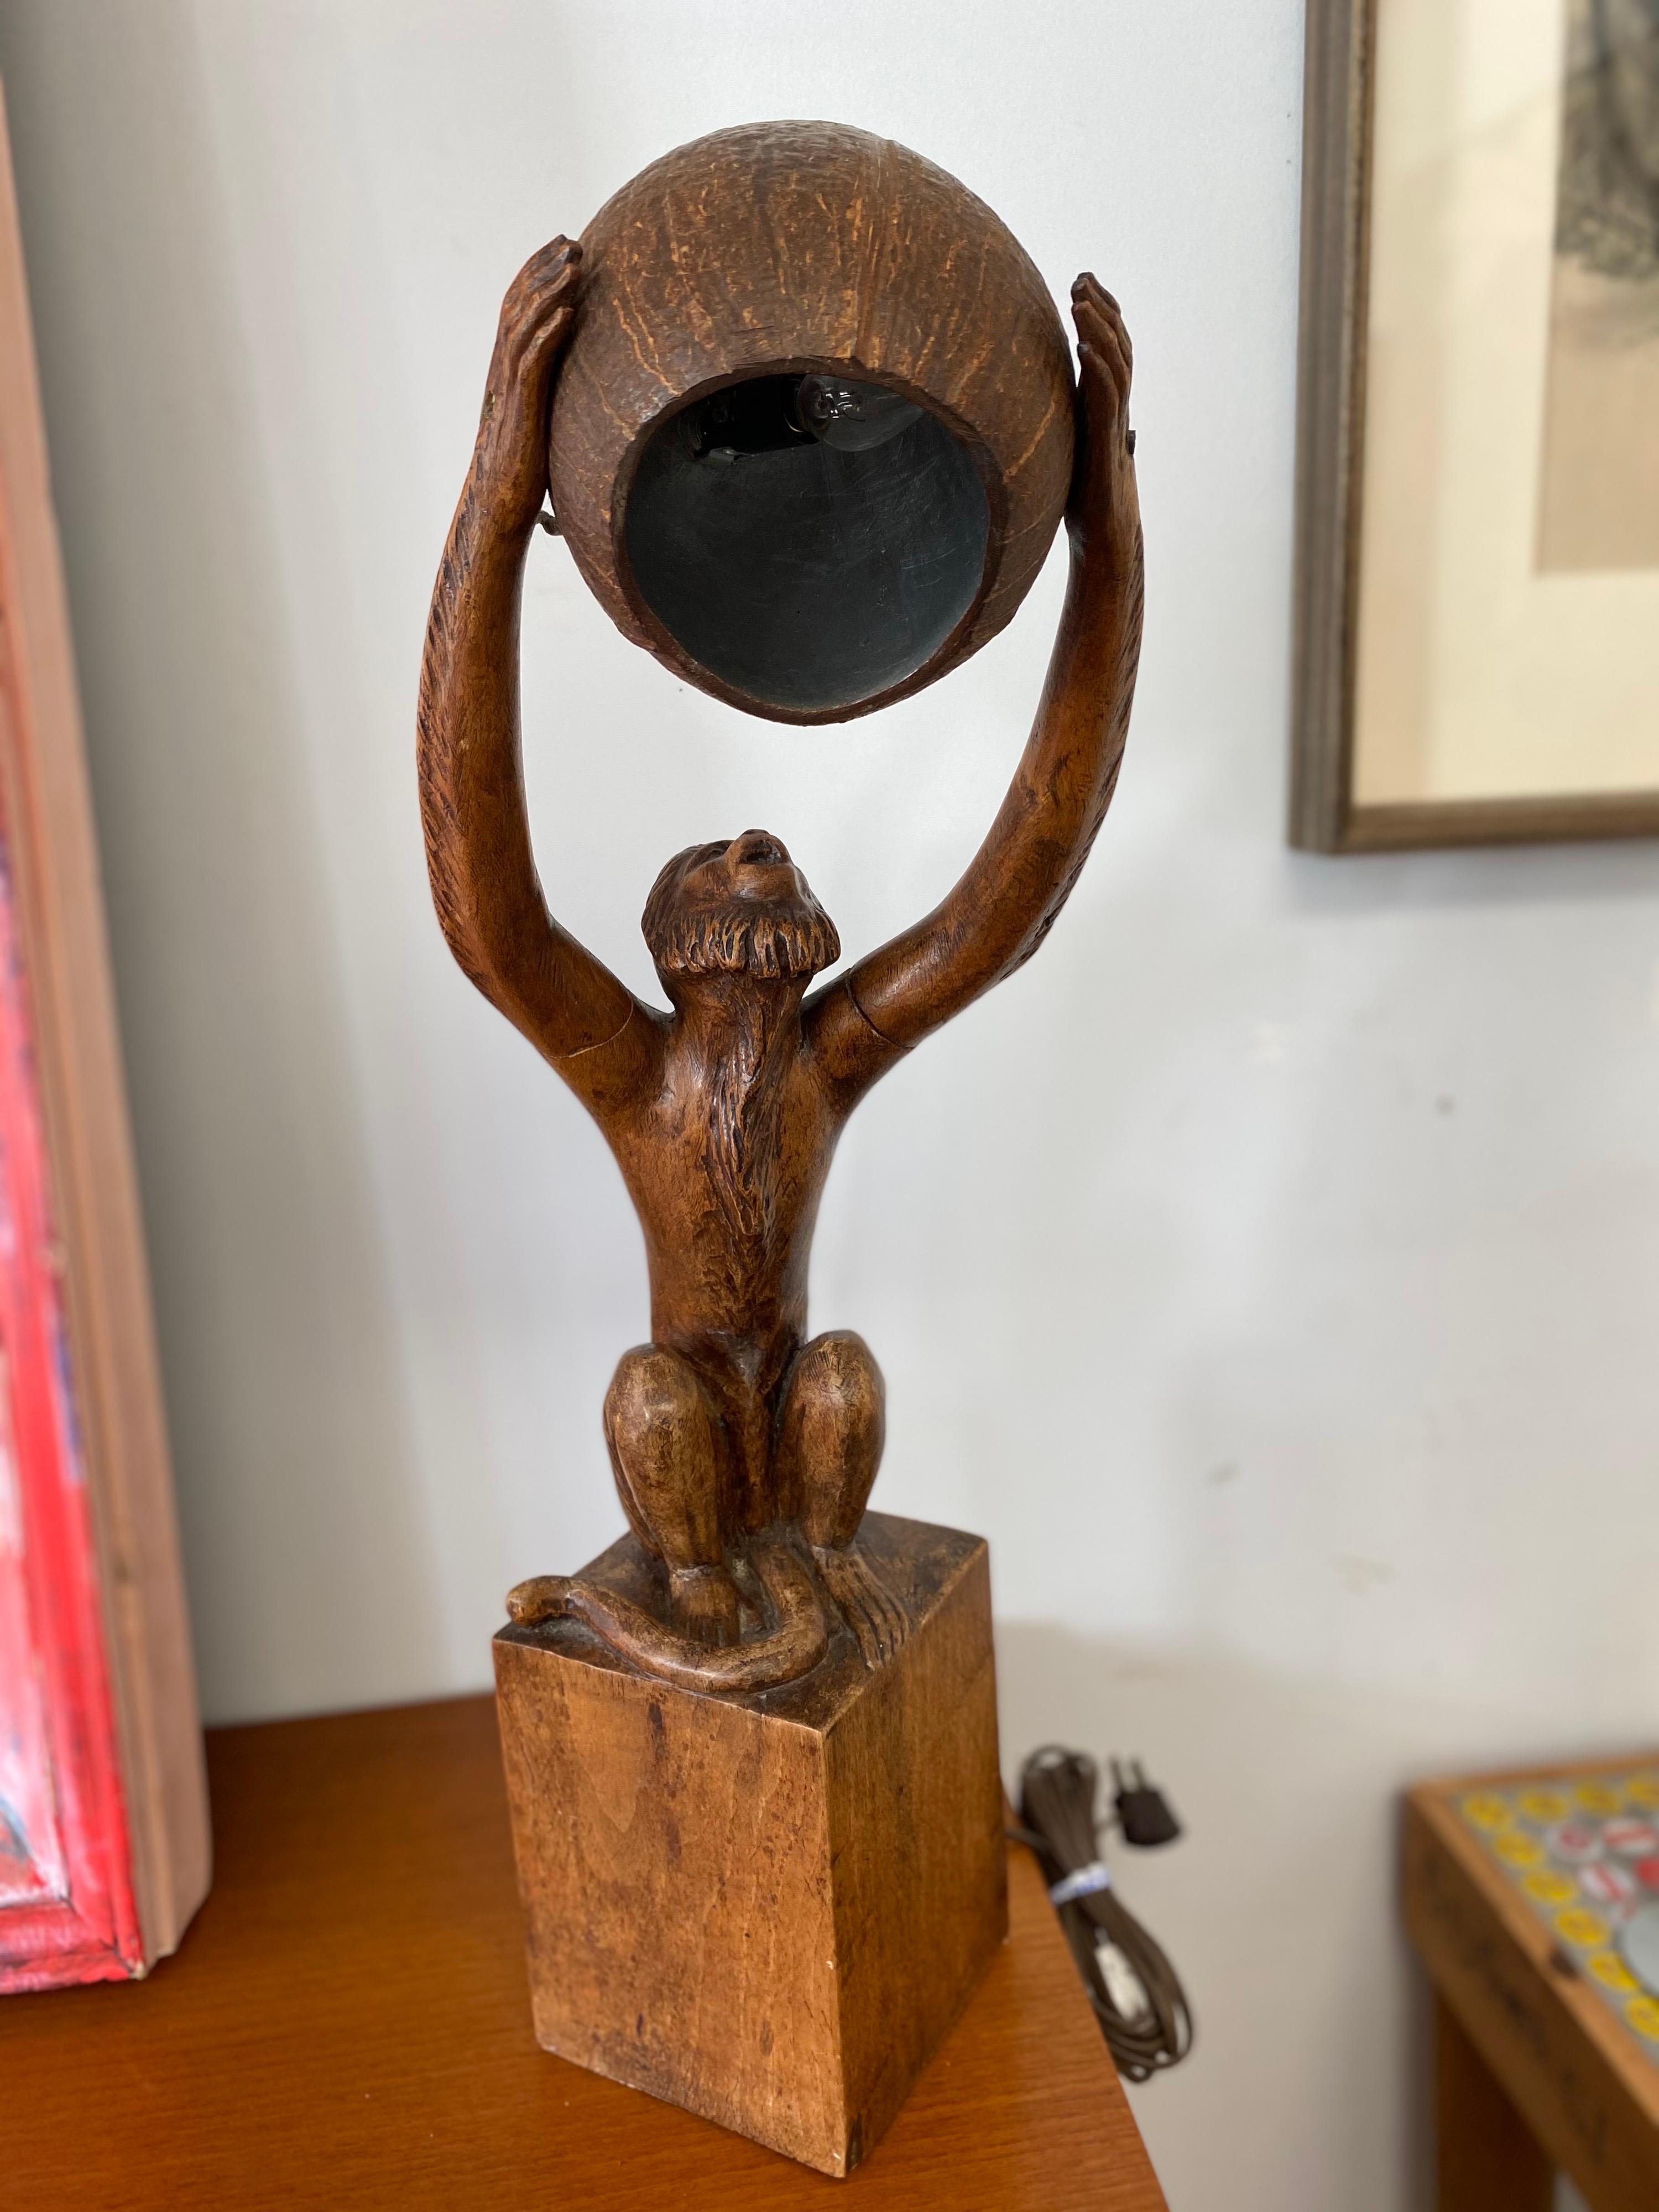 Unique vintage wood carved monkey lamp by P. Gilles. This lamp is in great vintage condition.